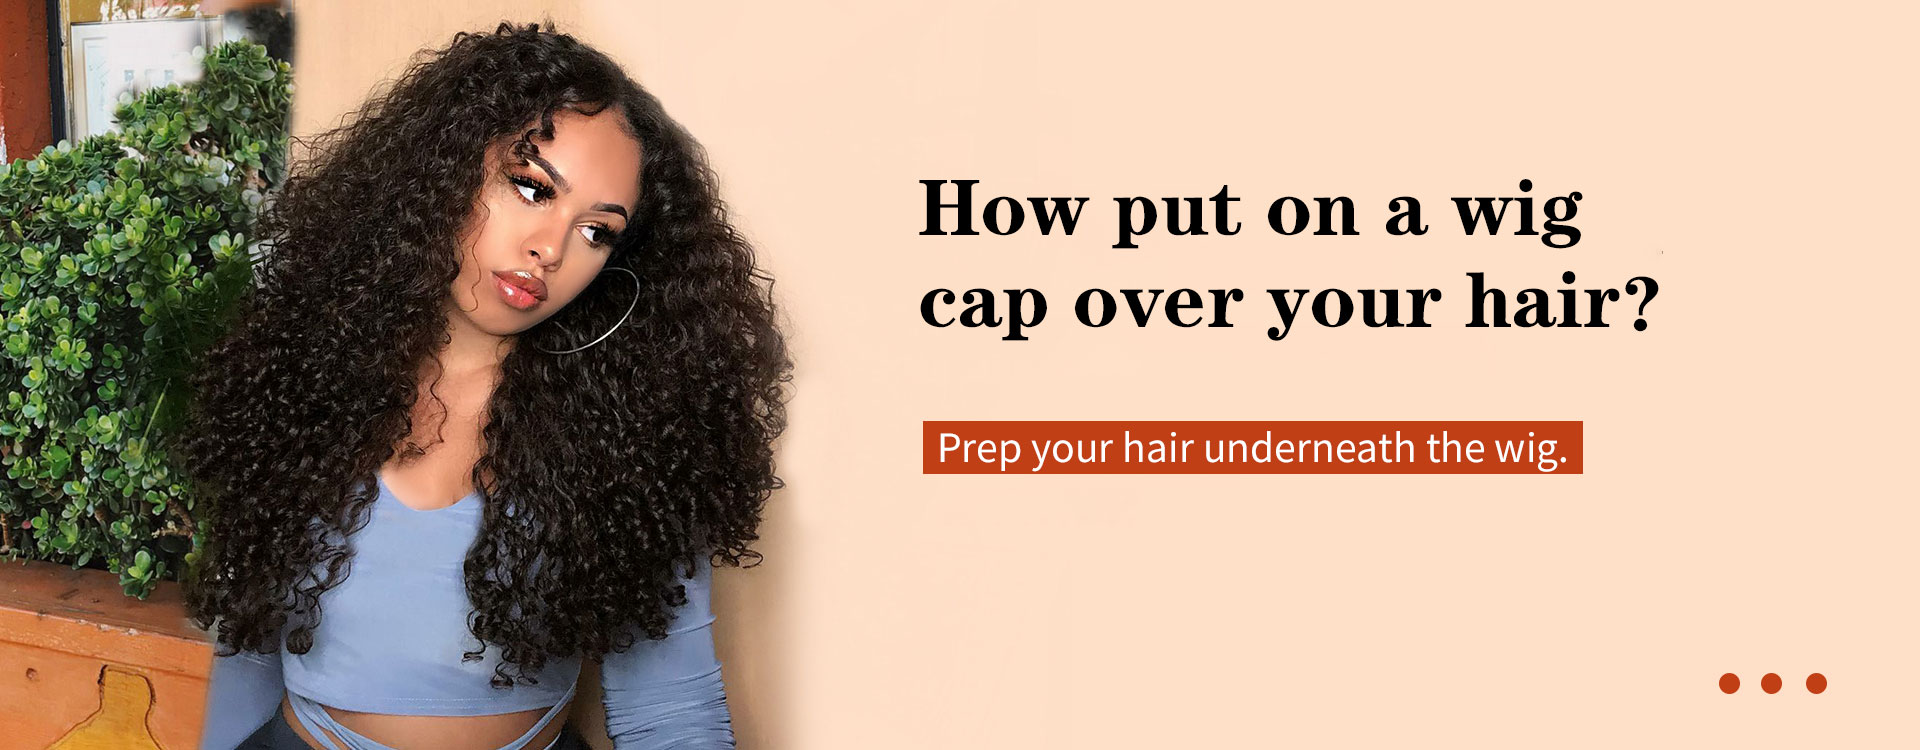 How to put on a wig cap over your hair?